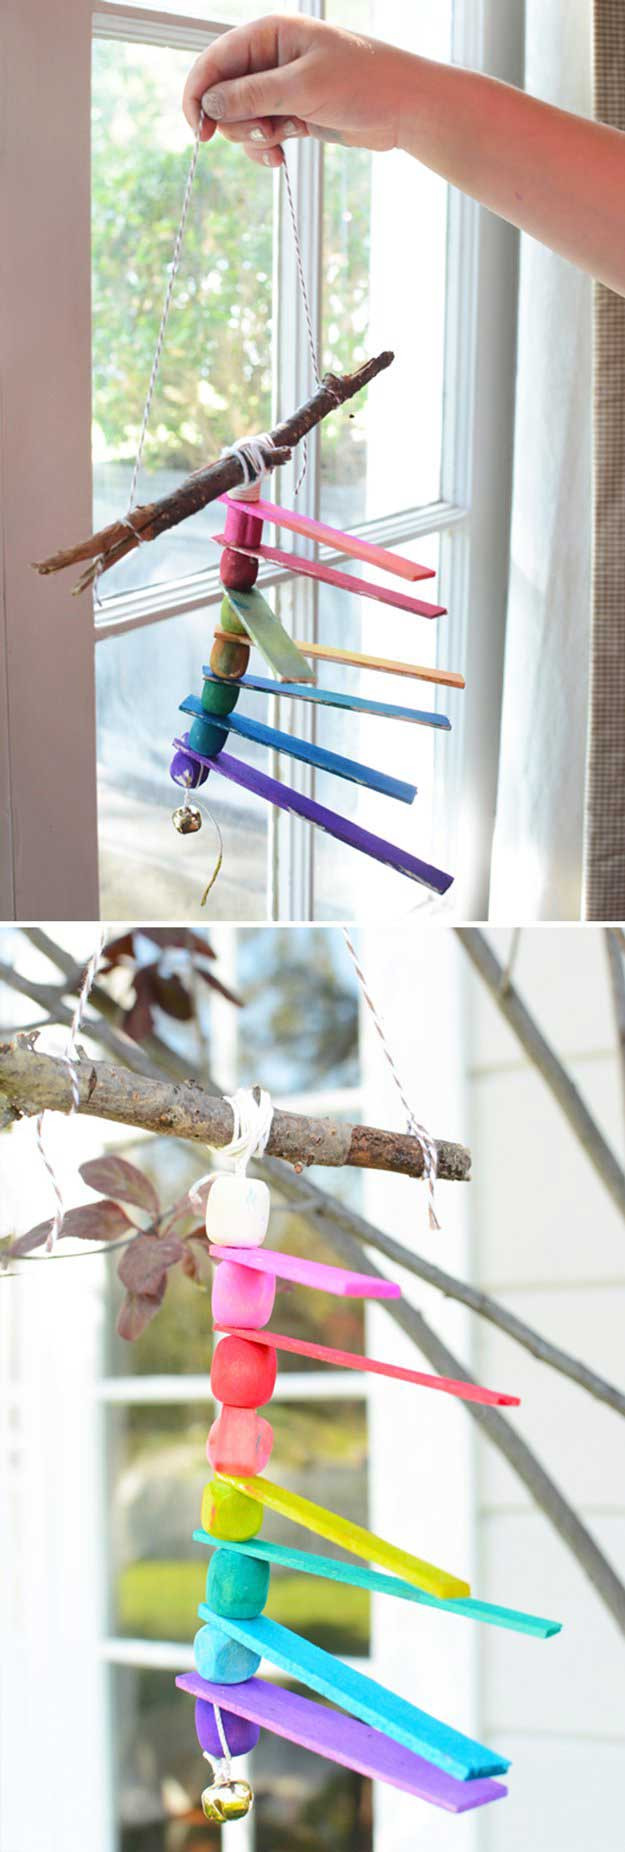 DIY Wind Chimes For Kids
 32 DIY Wind Chimes To Hang In A Beautiful Home